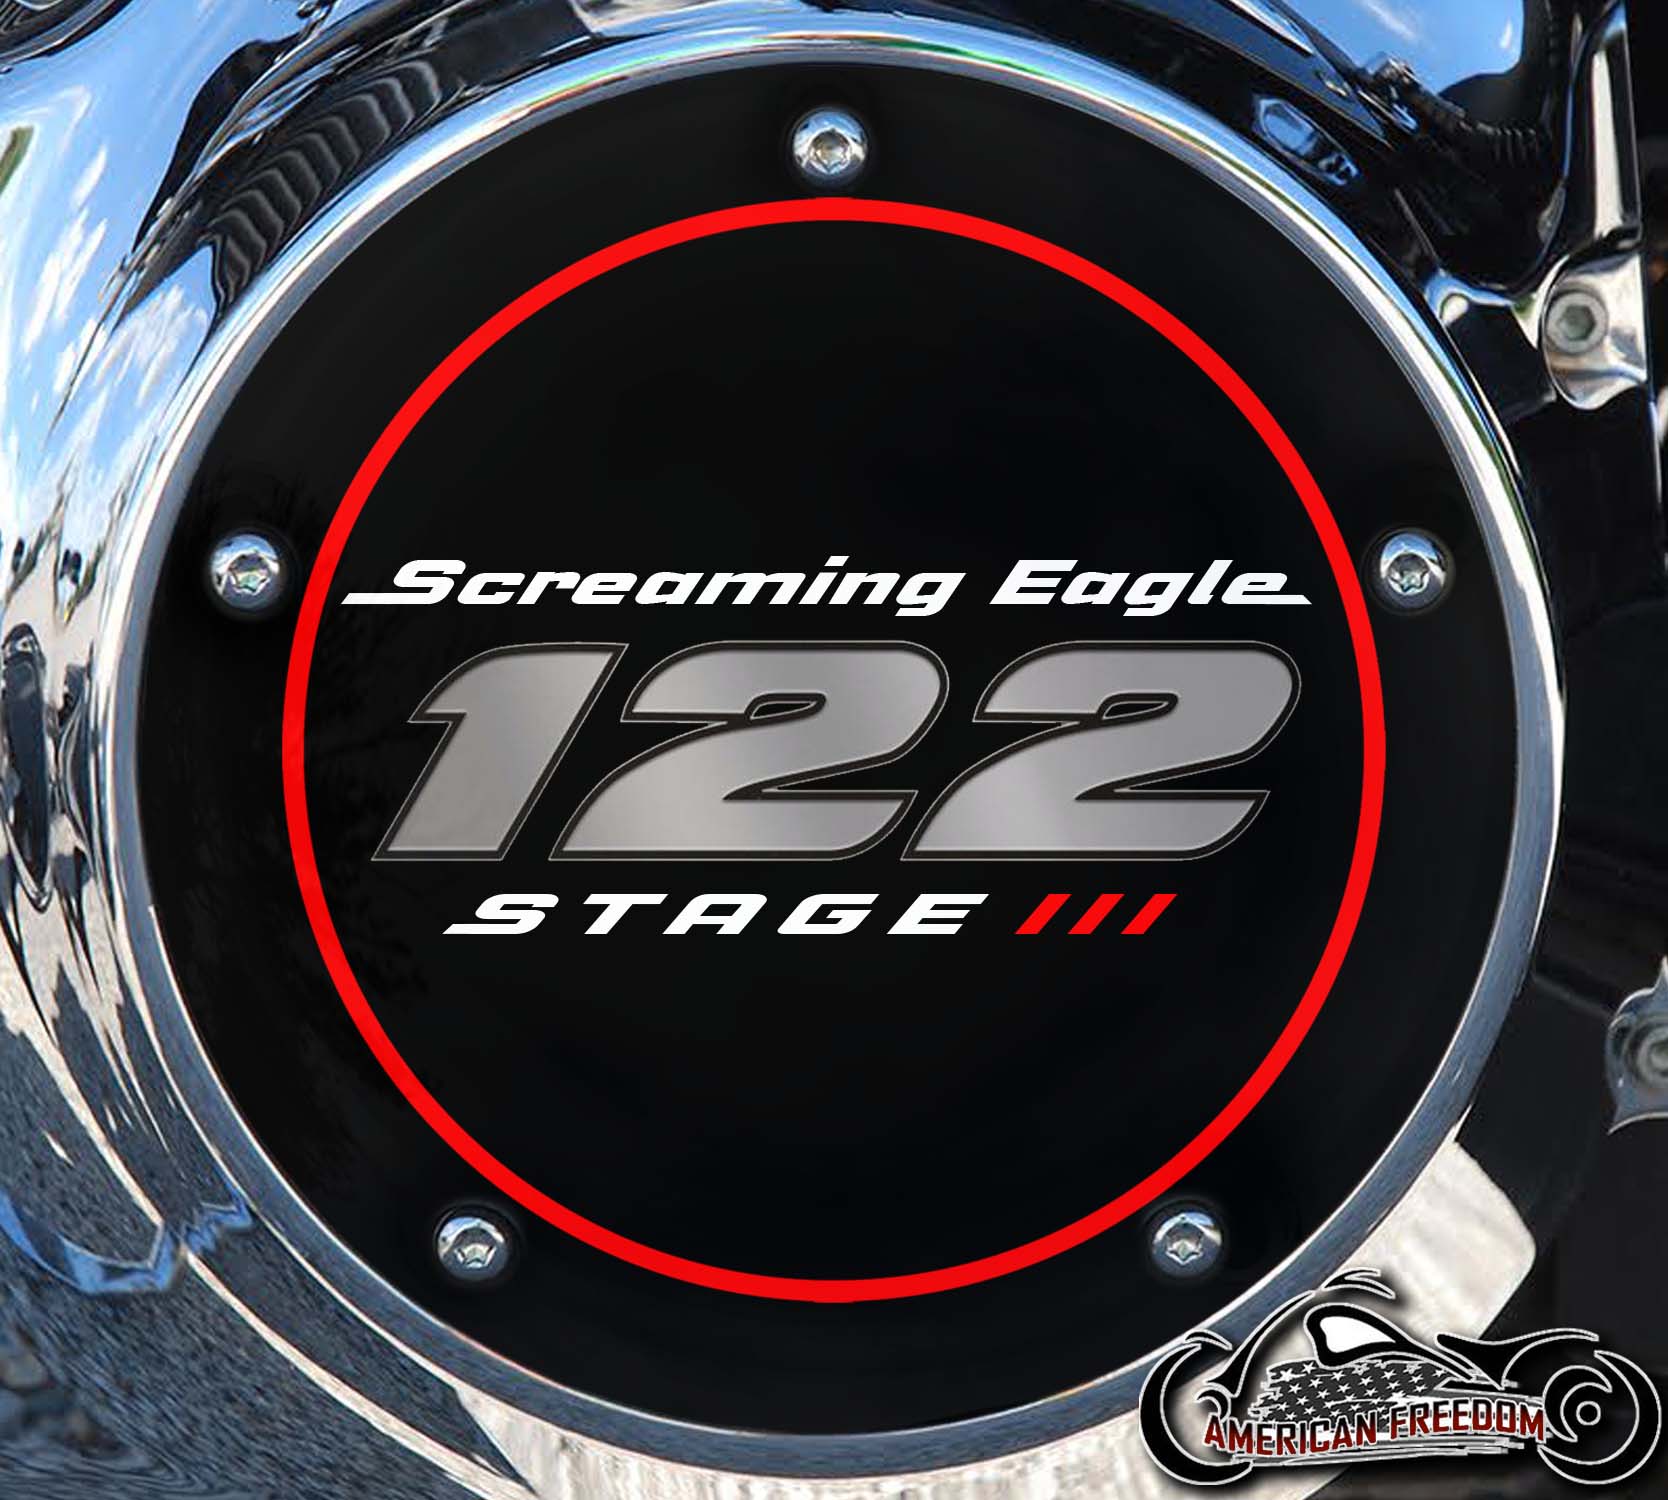 Screaming Eagle Stage III 122 Derby Cover OL